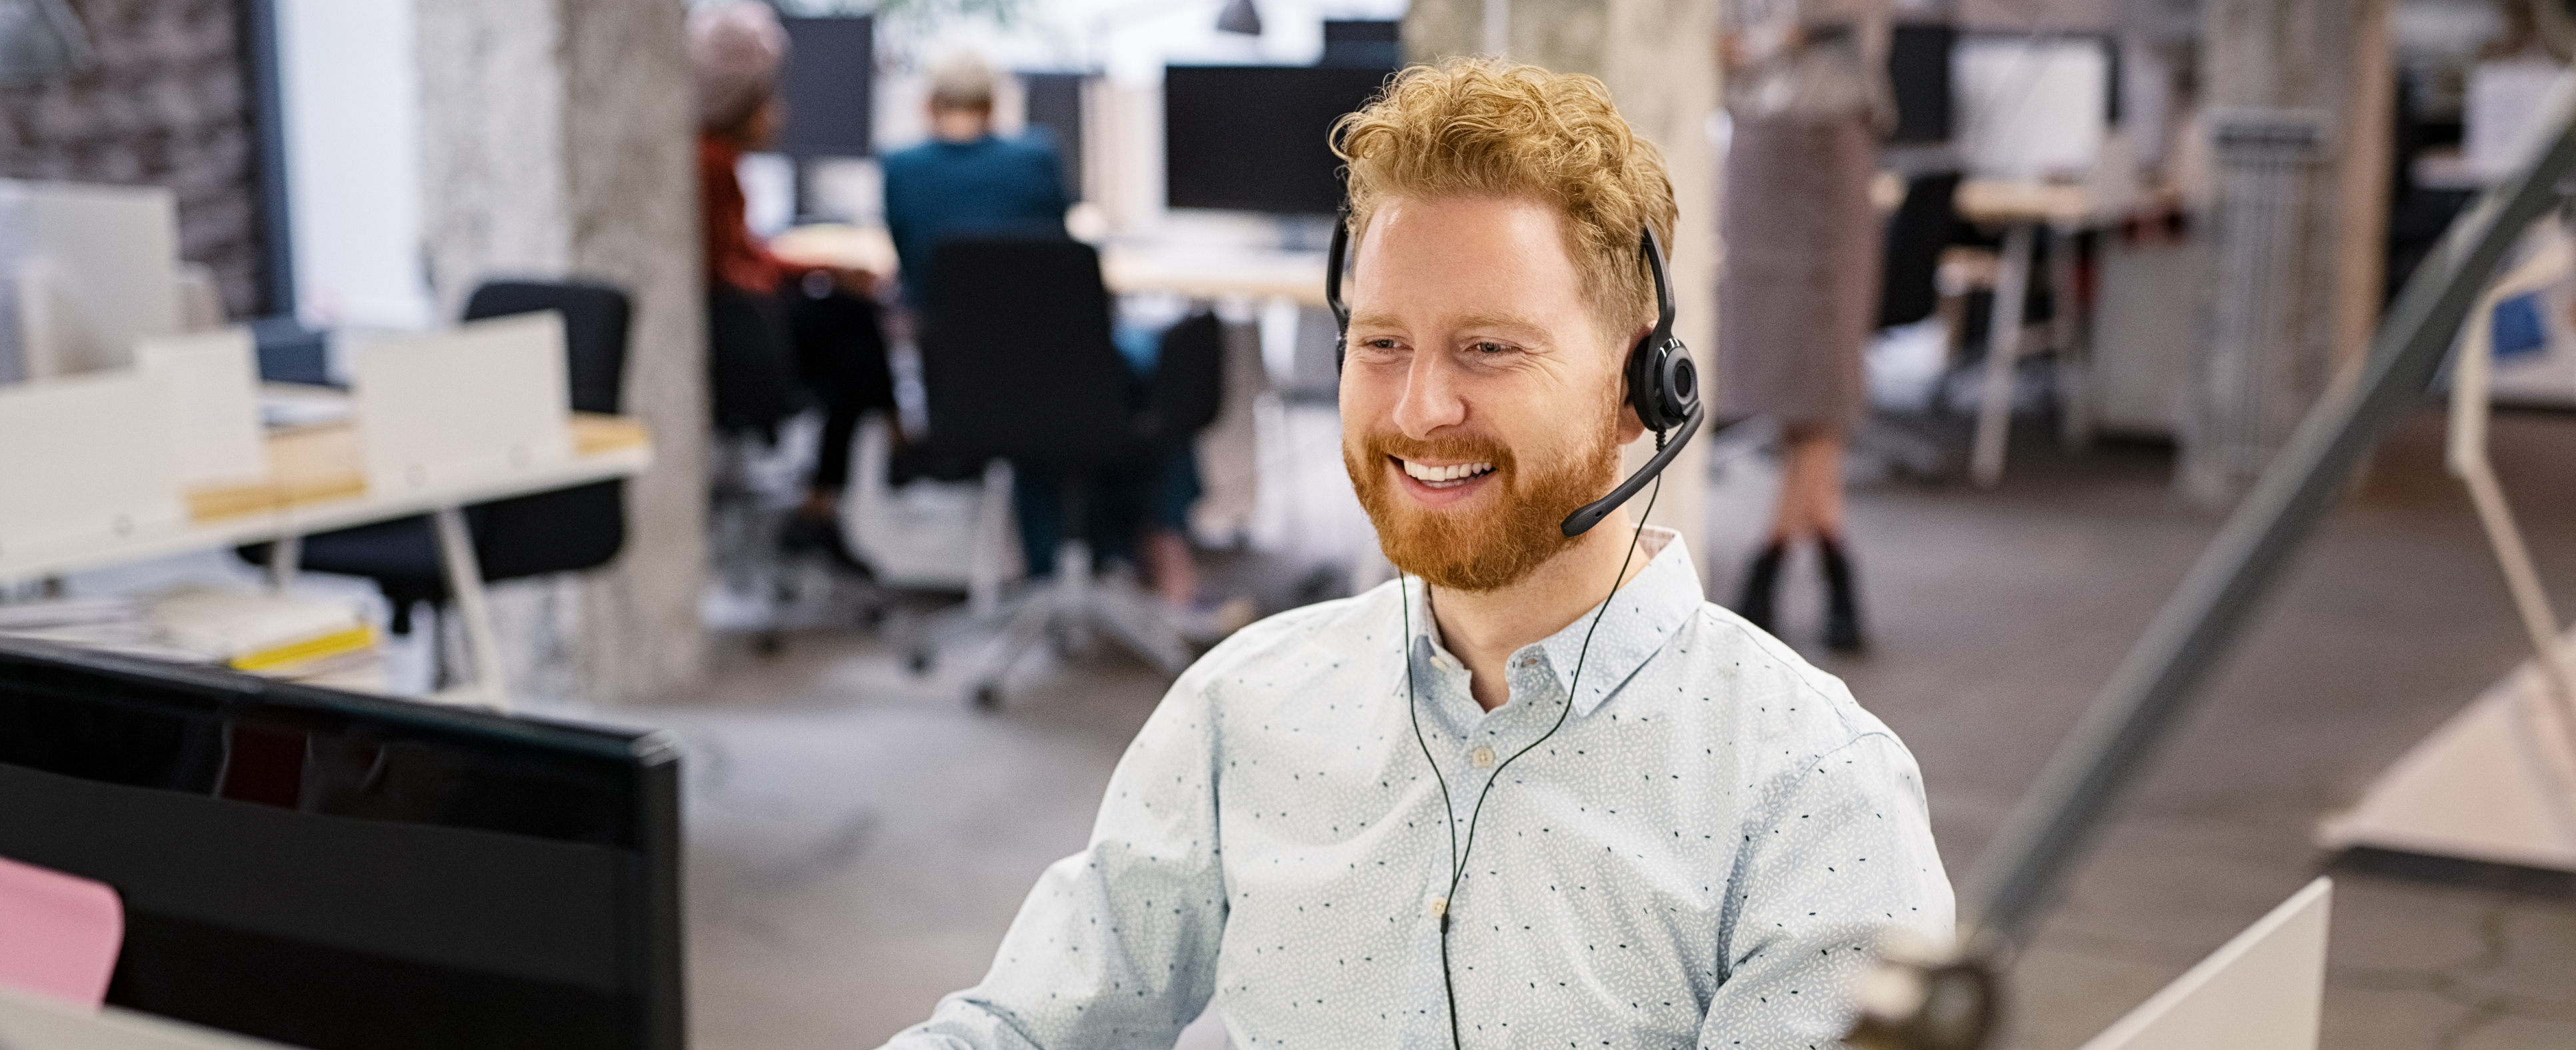 How a knowledge base helped a call center cross-train agents in one day